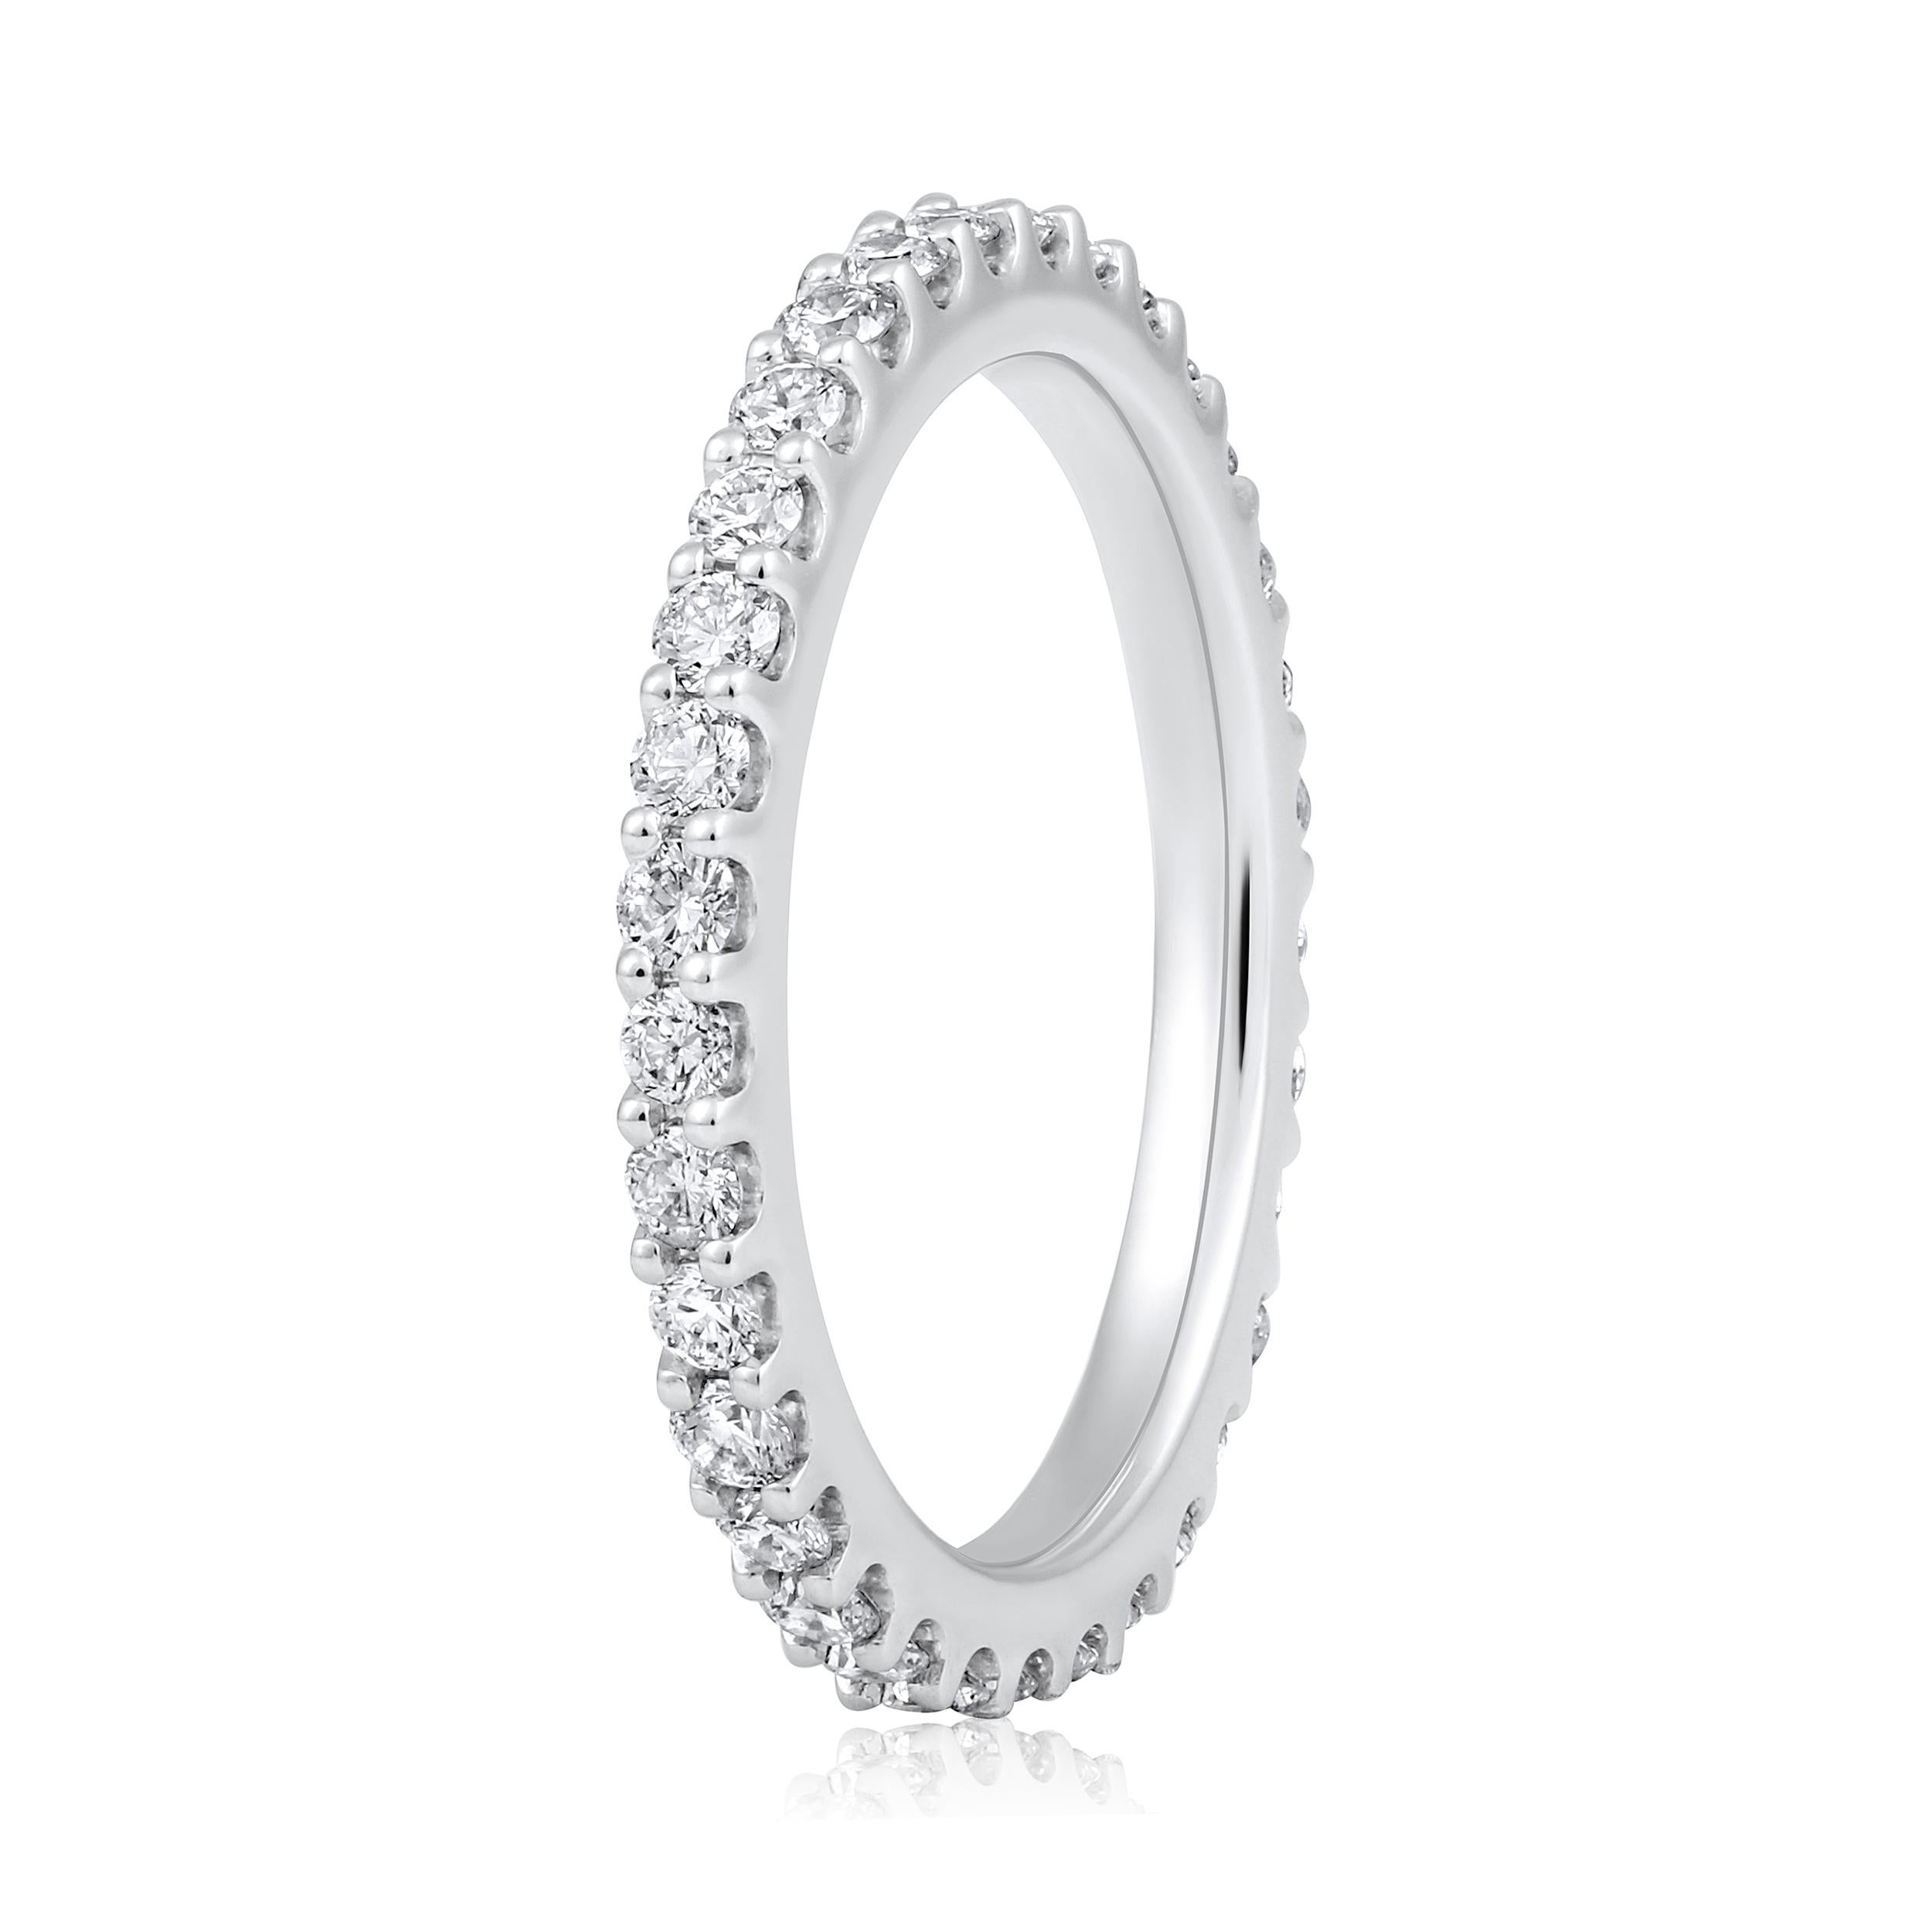 Ring Size: US 7 

Crafted in 2.67 grams of 14K White Gold, the ring contains 33 stones of Round Diamonds with a total of 0.77 carat in G-H color and SI clarity.

CONTEMPORARY AND TIMELESS ESSENCE: Crafted in 14-karat/18-karat with 100% natural